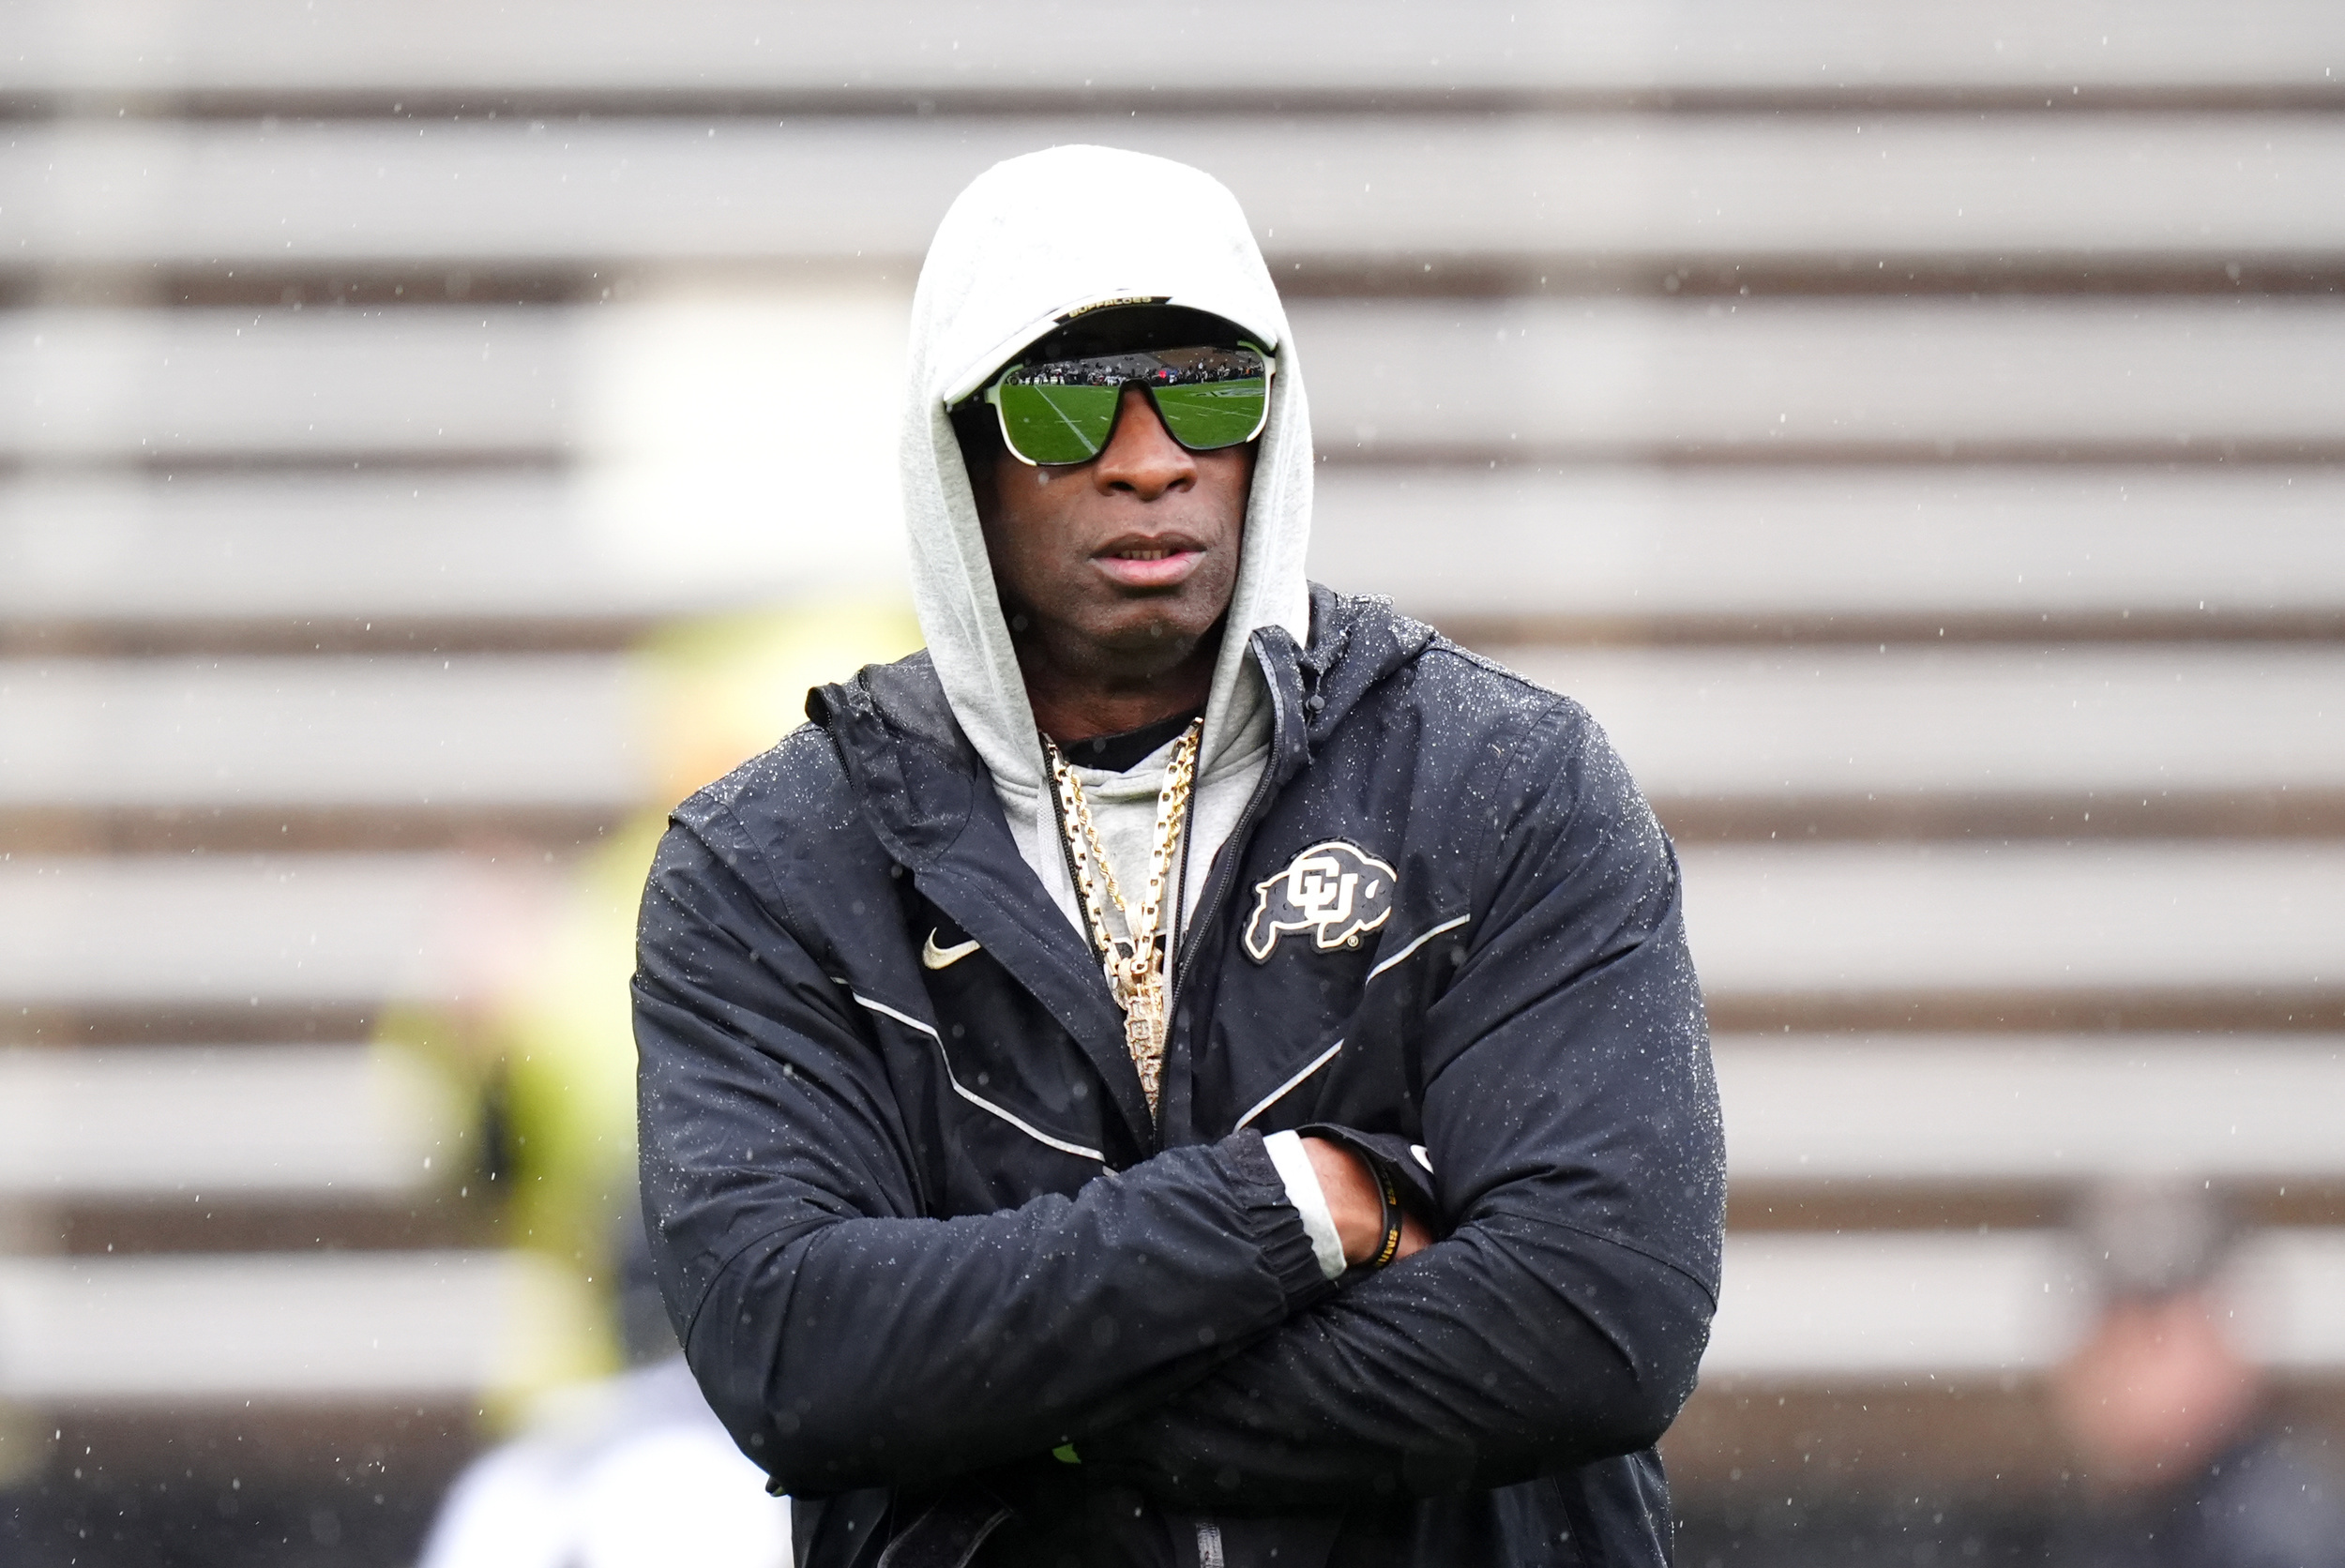 colorado spring game attendance plummets amid questions about deion sanders' future